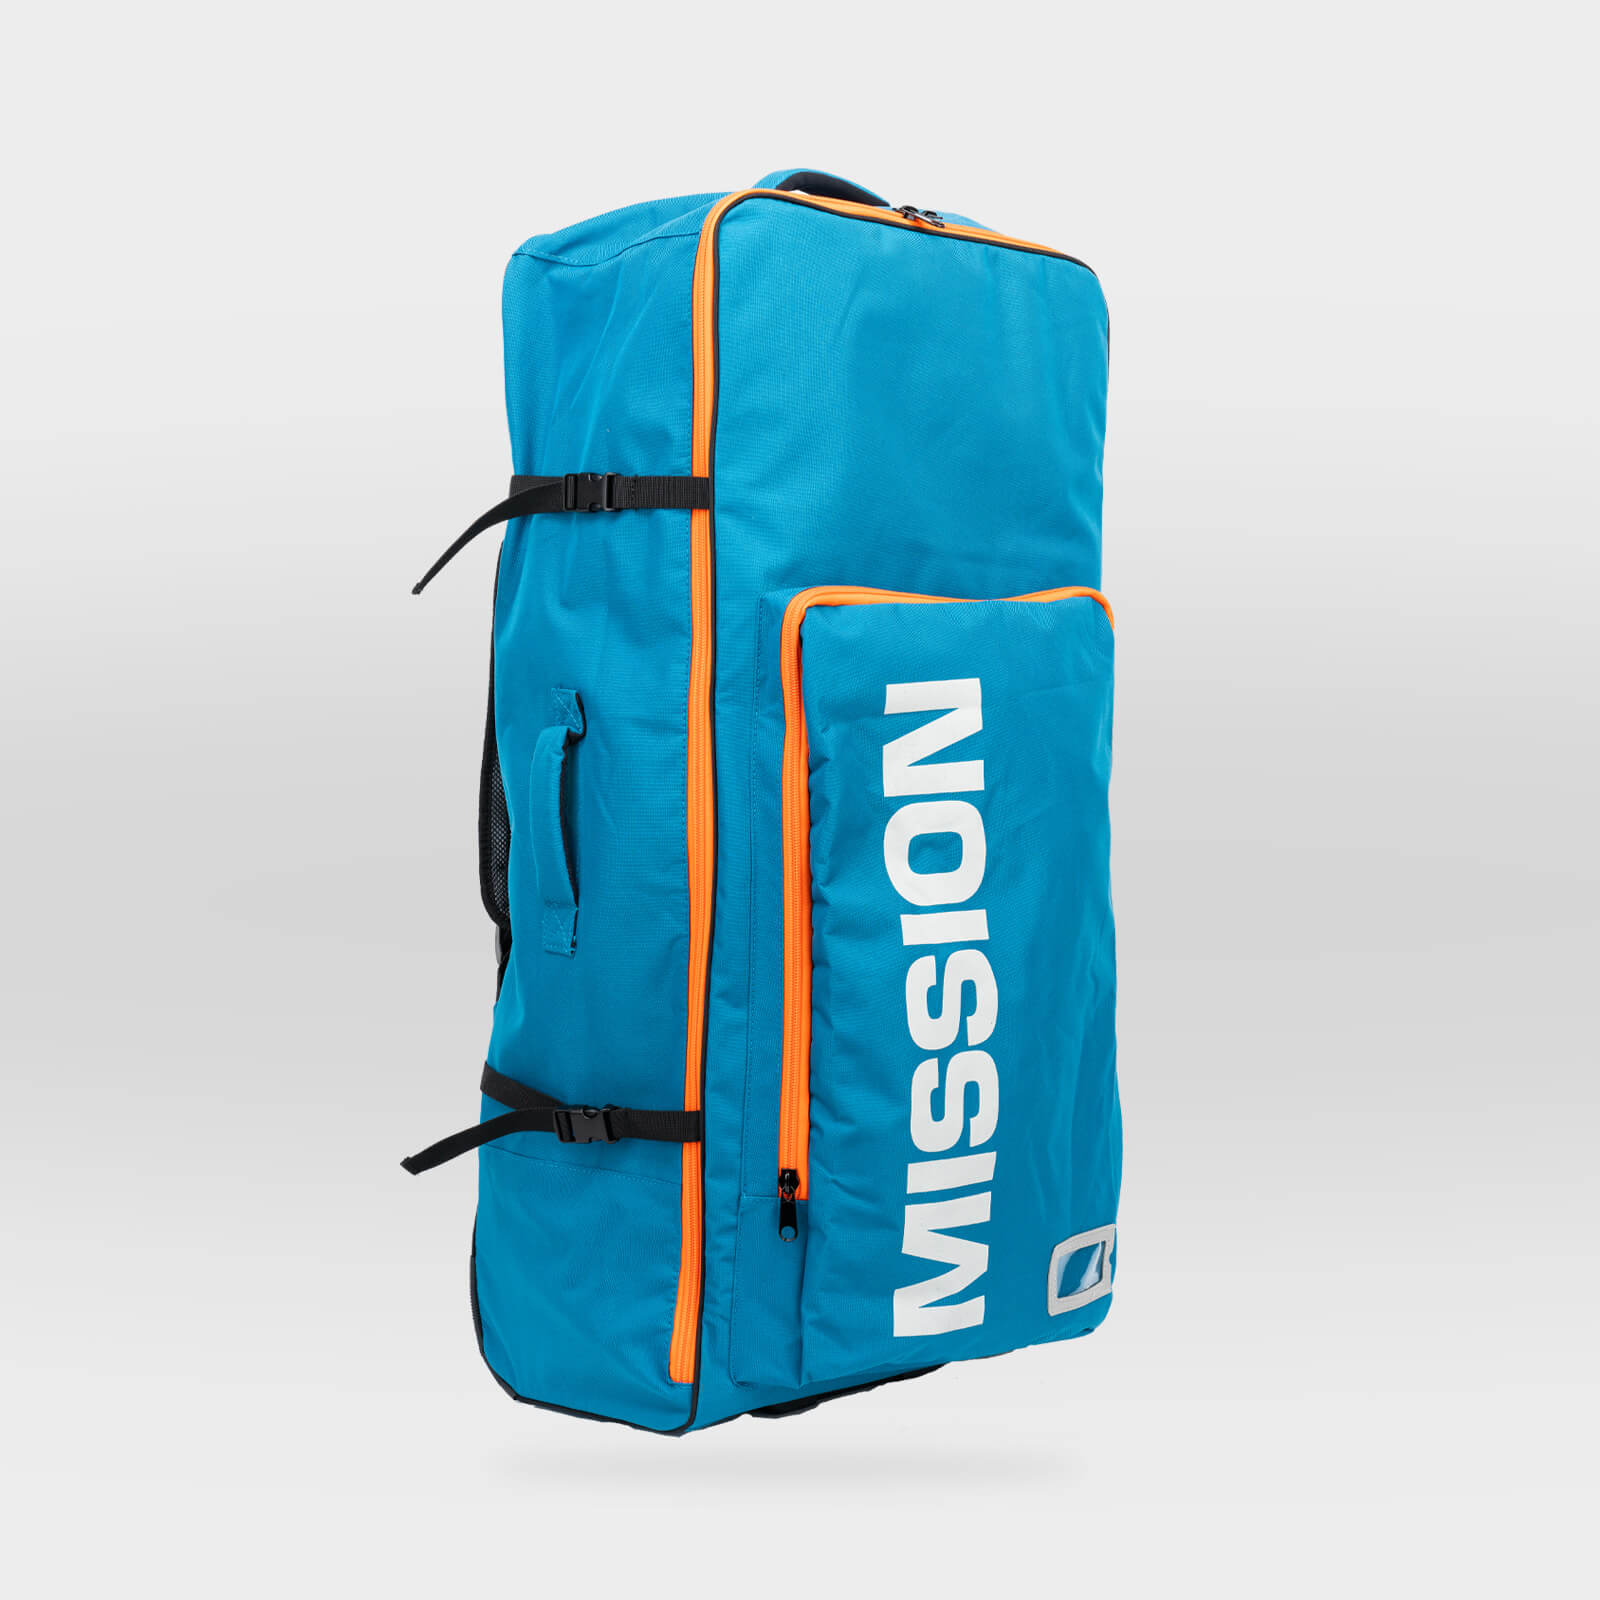 carrying back for STILLWATER Inflatable Kayak + iSUP Crossover